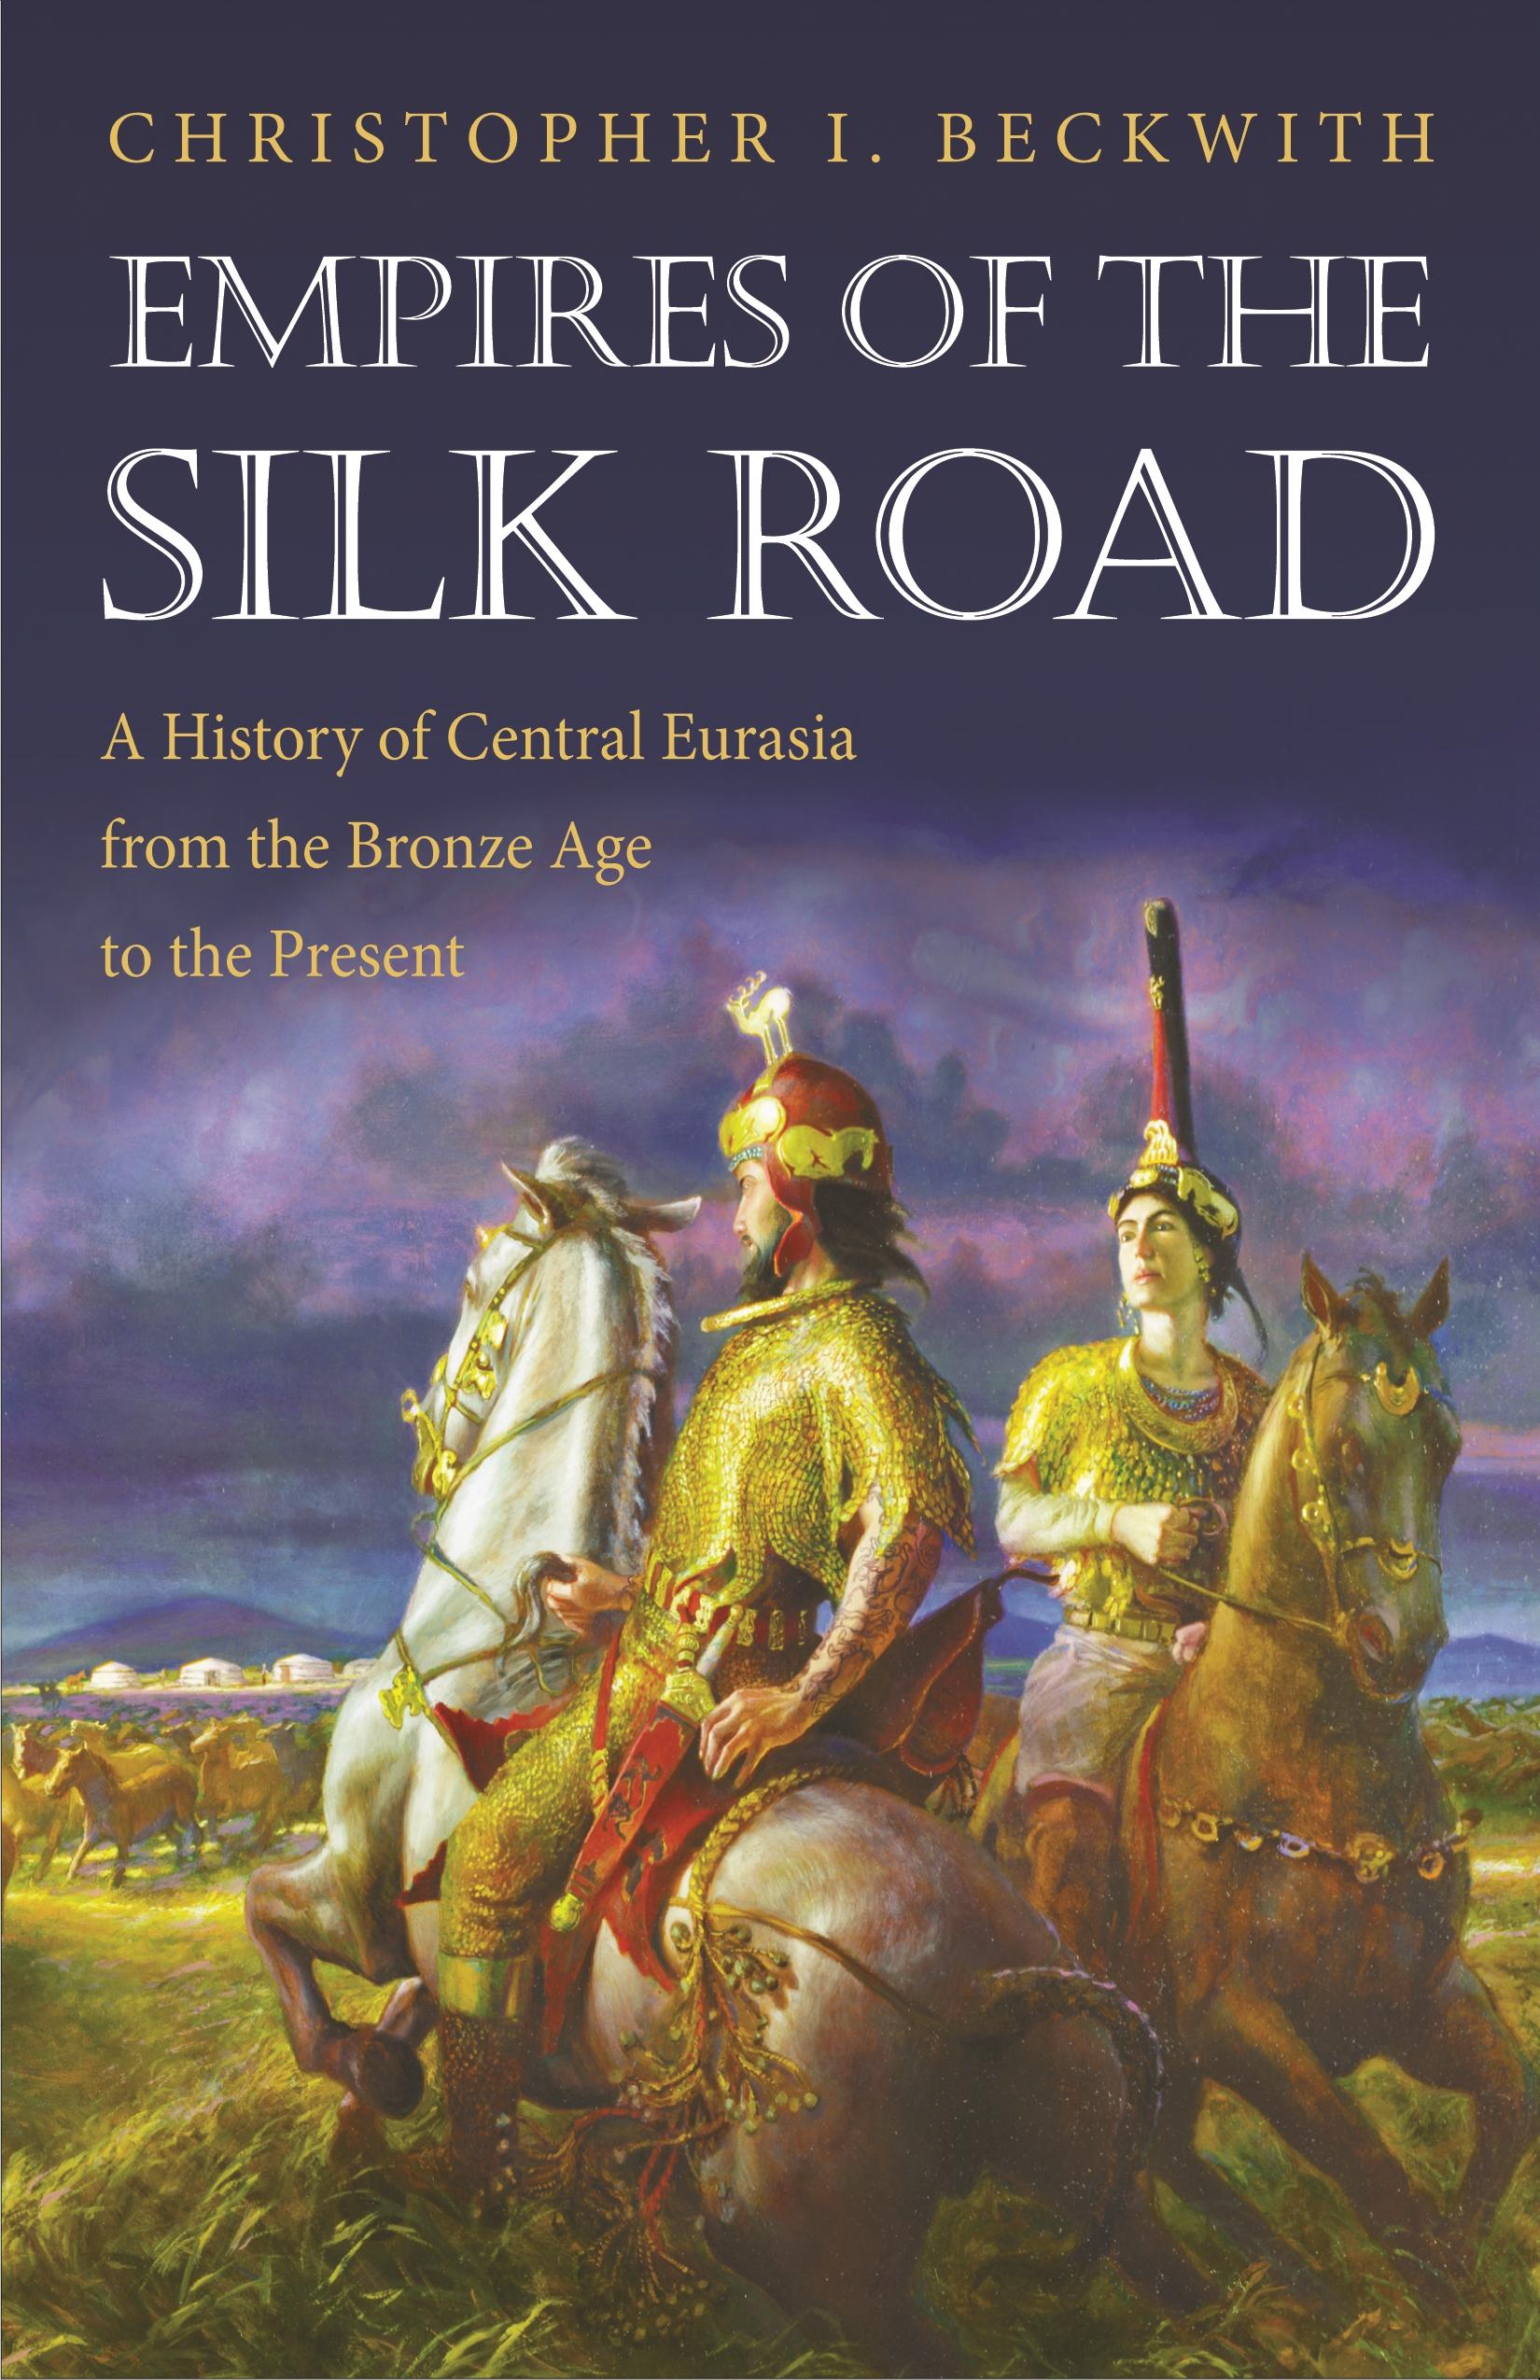 Empires of the Silk Road / A History of Central Eurasia from the Bronze Age to the Present / Christopher I. Beckwith / Taschenbuch / Kartoniert / Broschiert / Englisch / 2011 / EAN 9780691150345 - Beckwith, Christopher I.